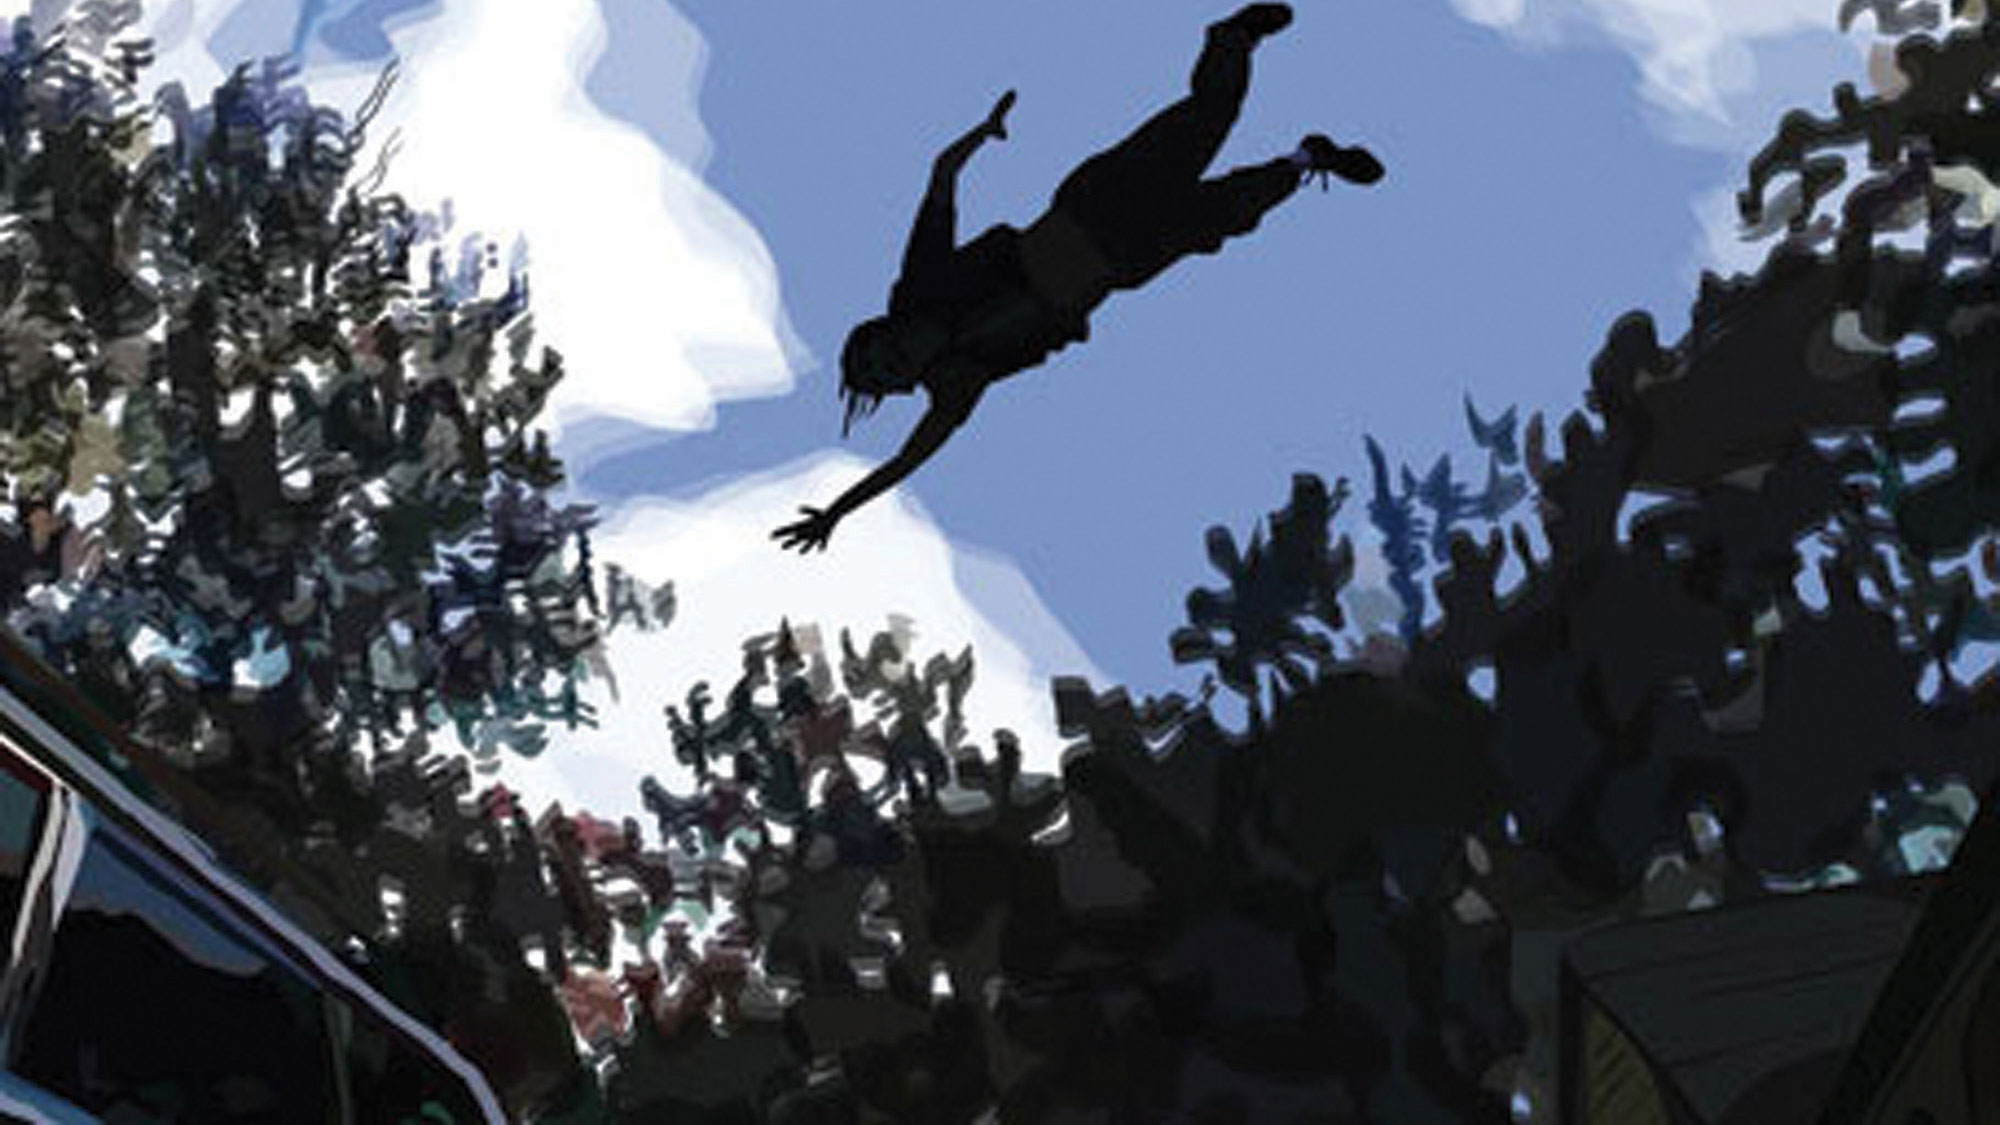 A man flying through the air with one arm reaching forward against a blue sky and foliage. 